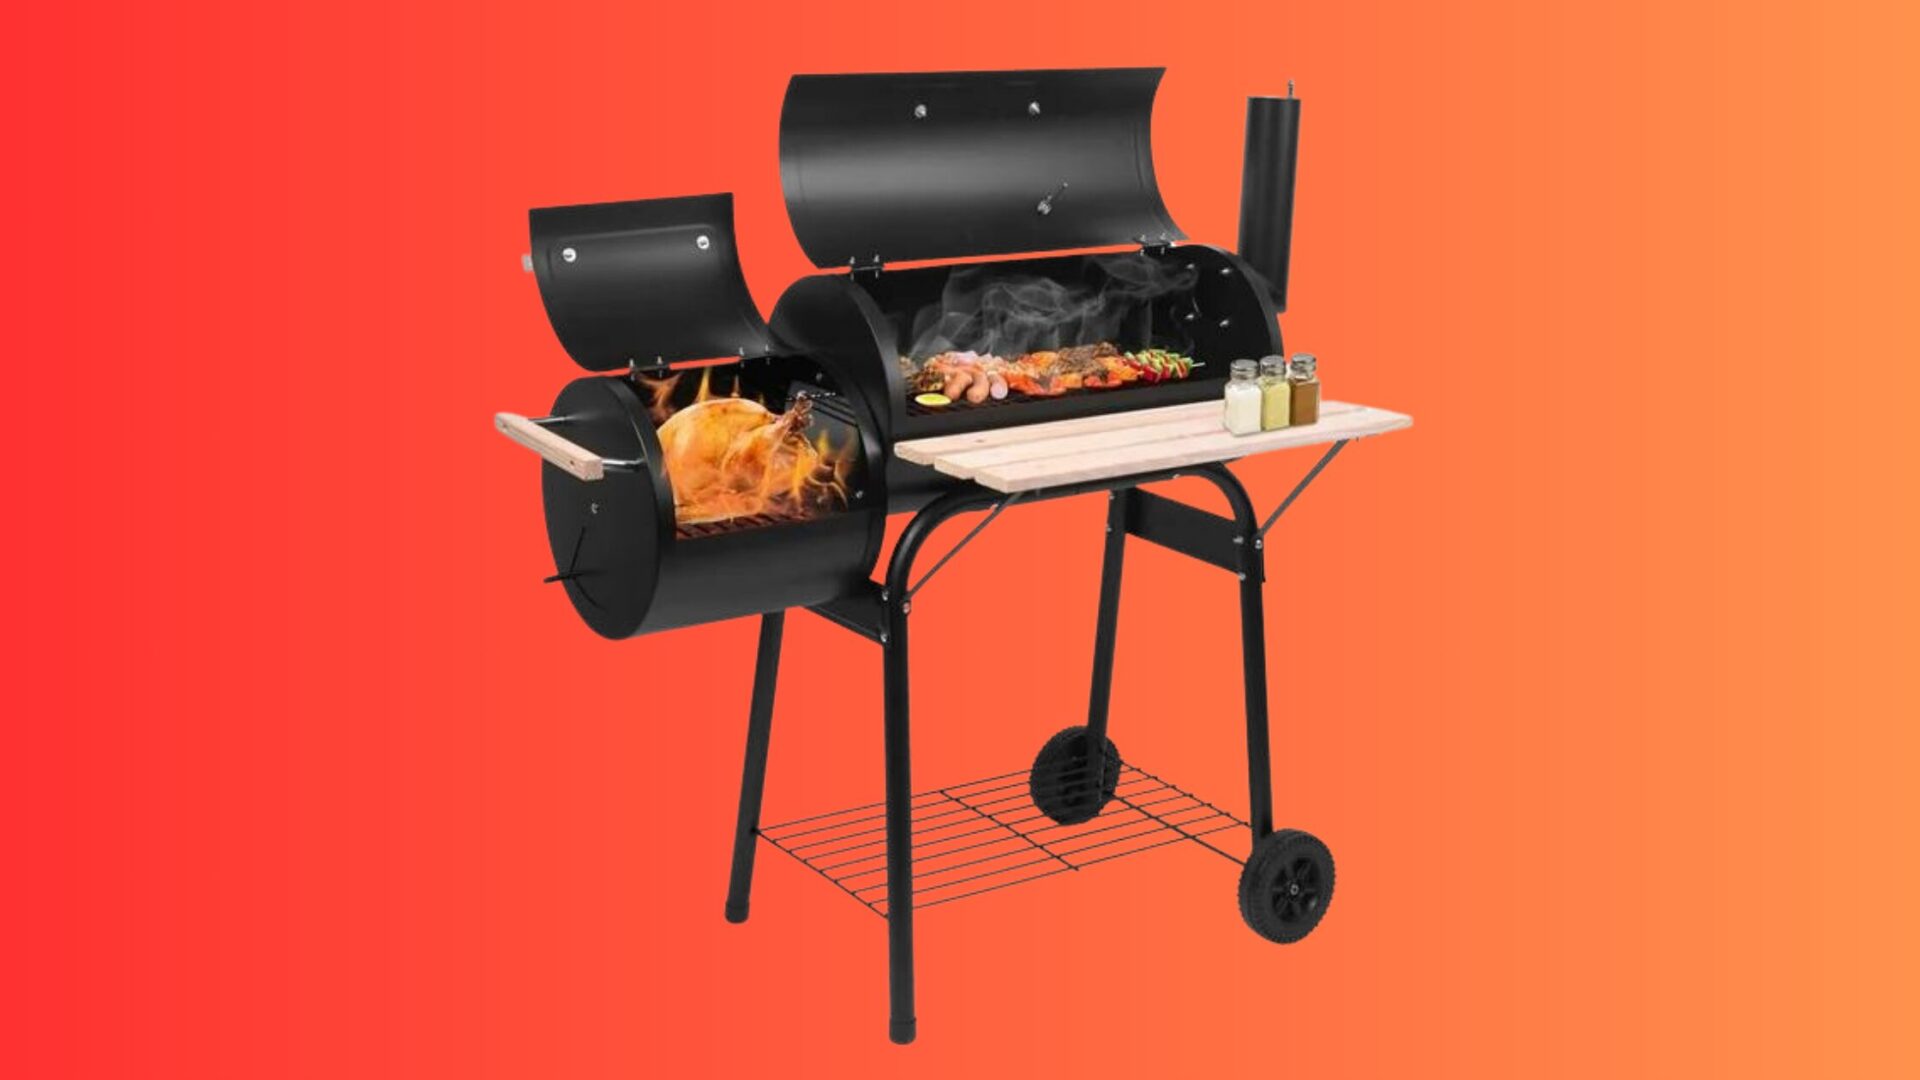 Zimtown BBQ Charcoal Grill On Sale at Walmart for $119.99 (Orig. $173.99)